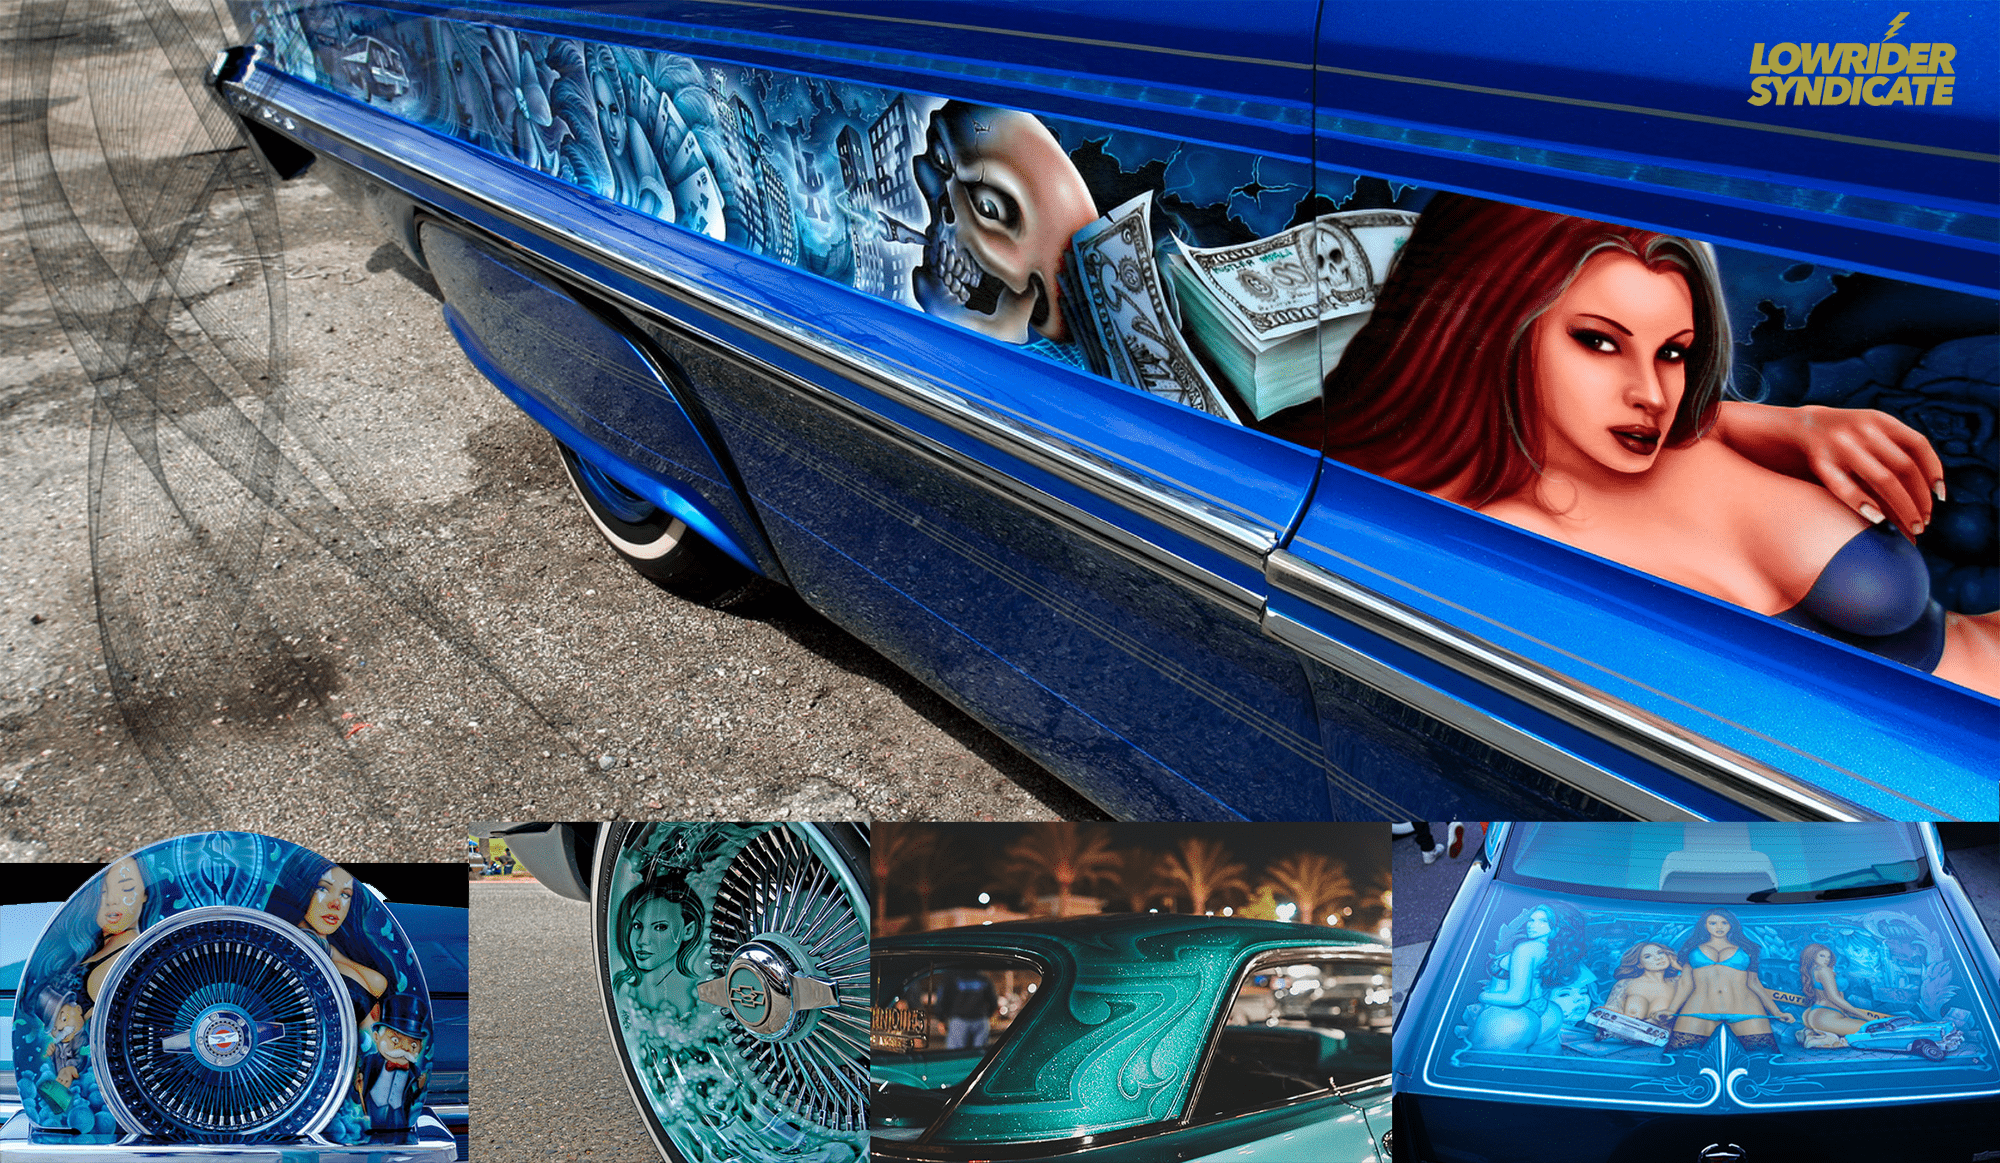 Lowriders: The Art Behind the Cars - Lowrider Syndicate